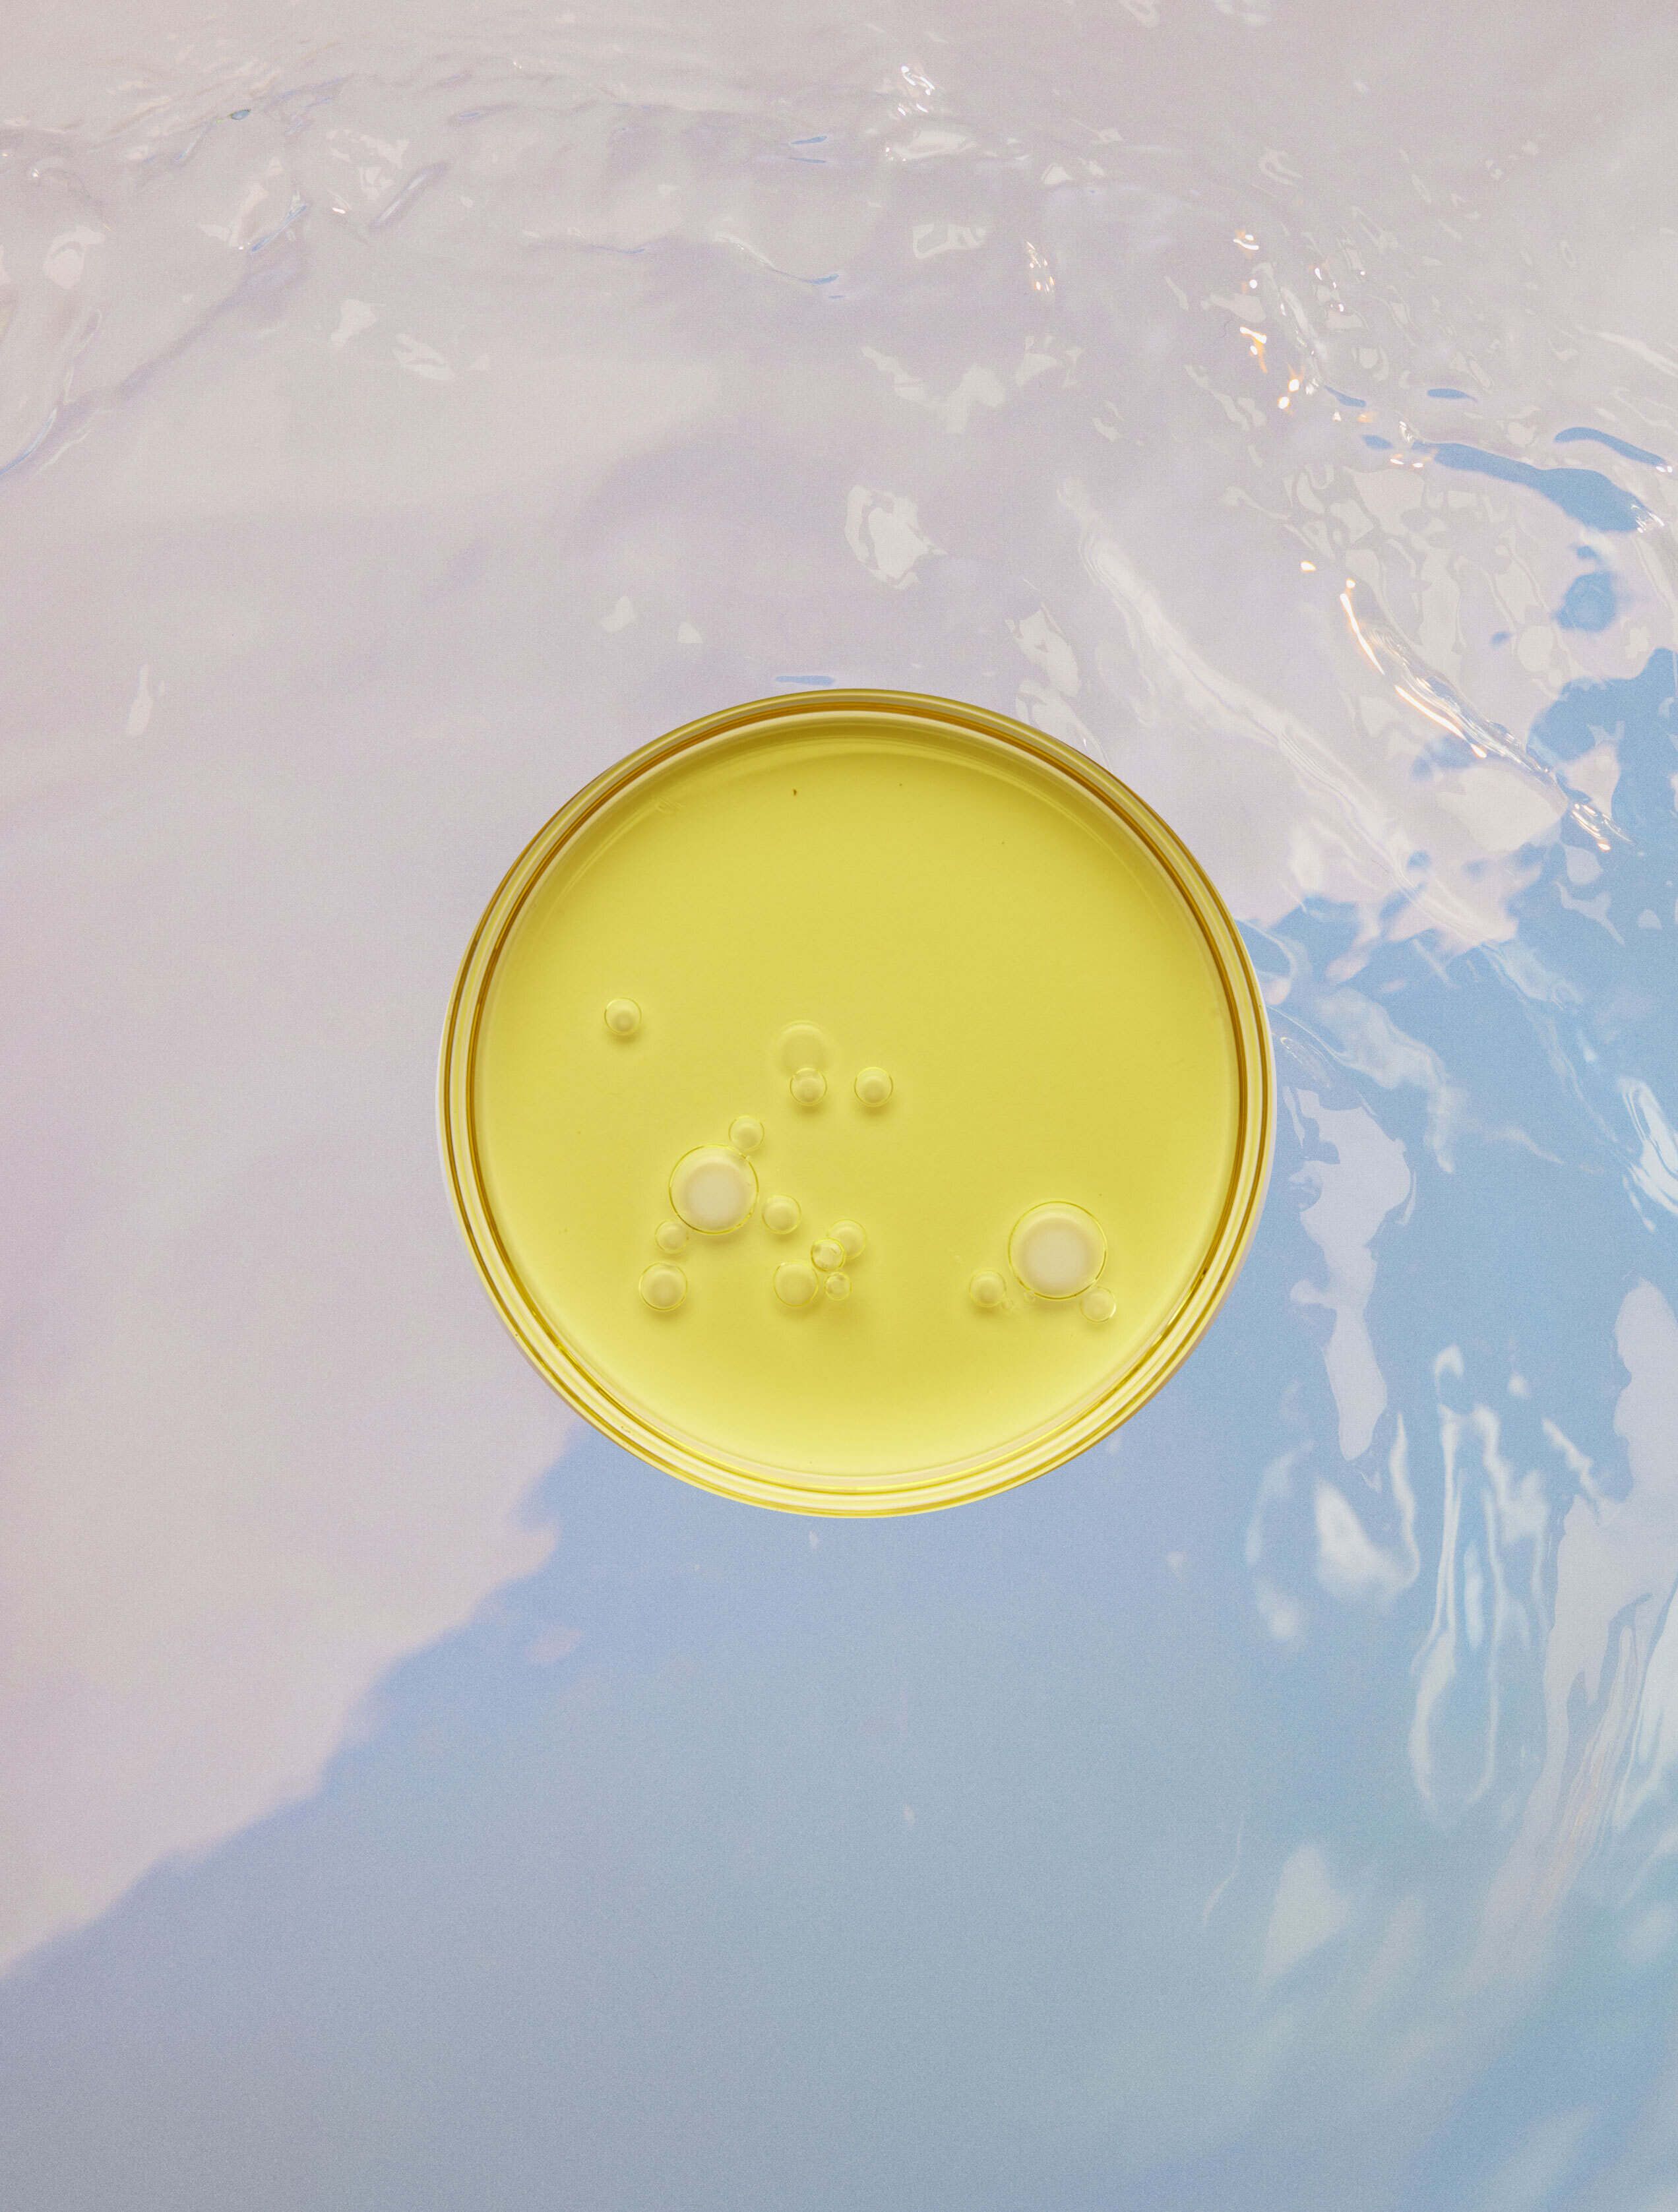 Yellow oil in a petri dish on a light blue background